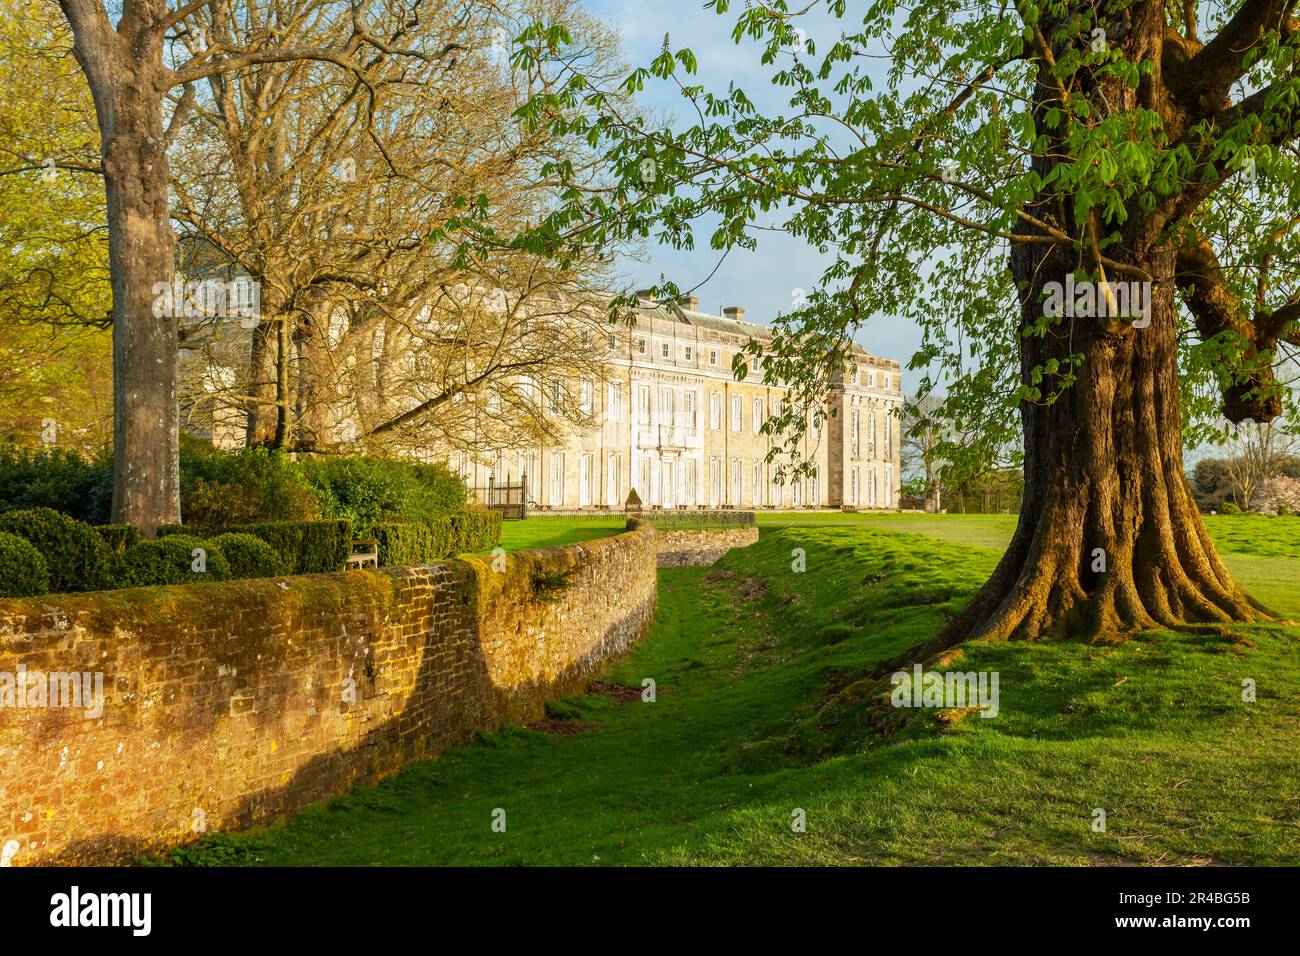 Frühlingsabend im Petworth House in Petworth Park, West Sussex, England. Stockfoto